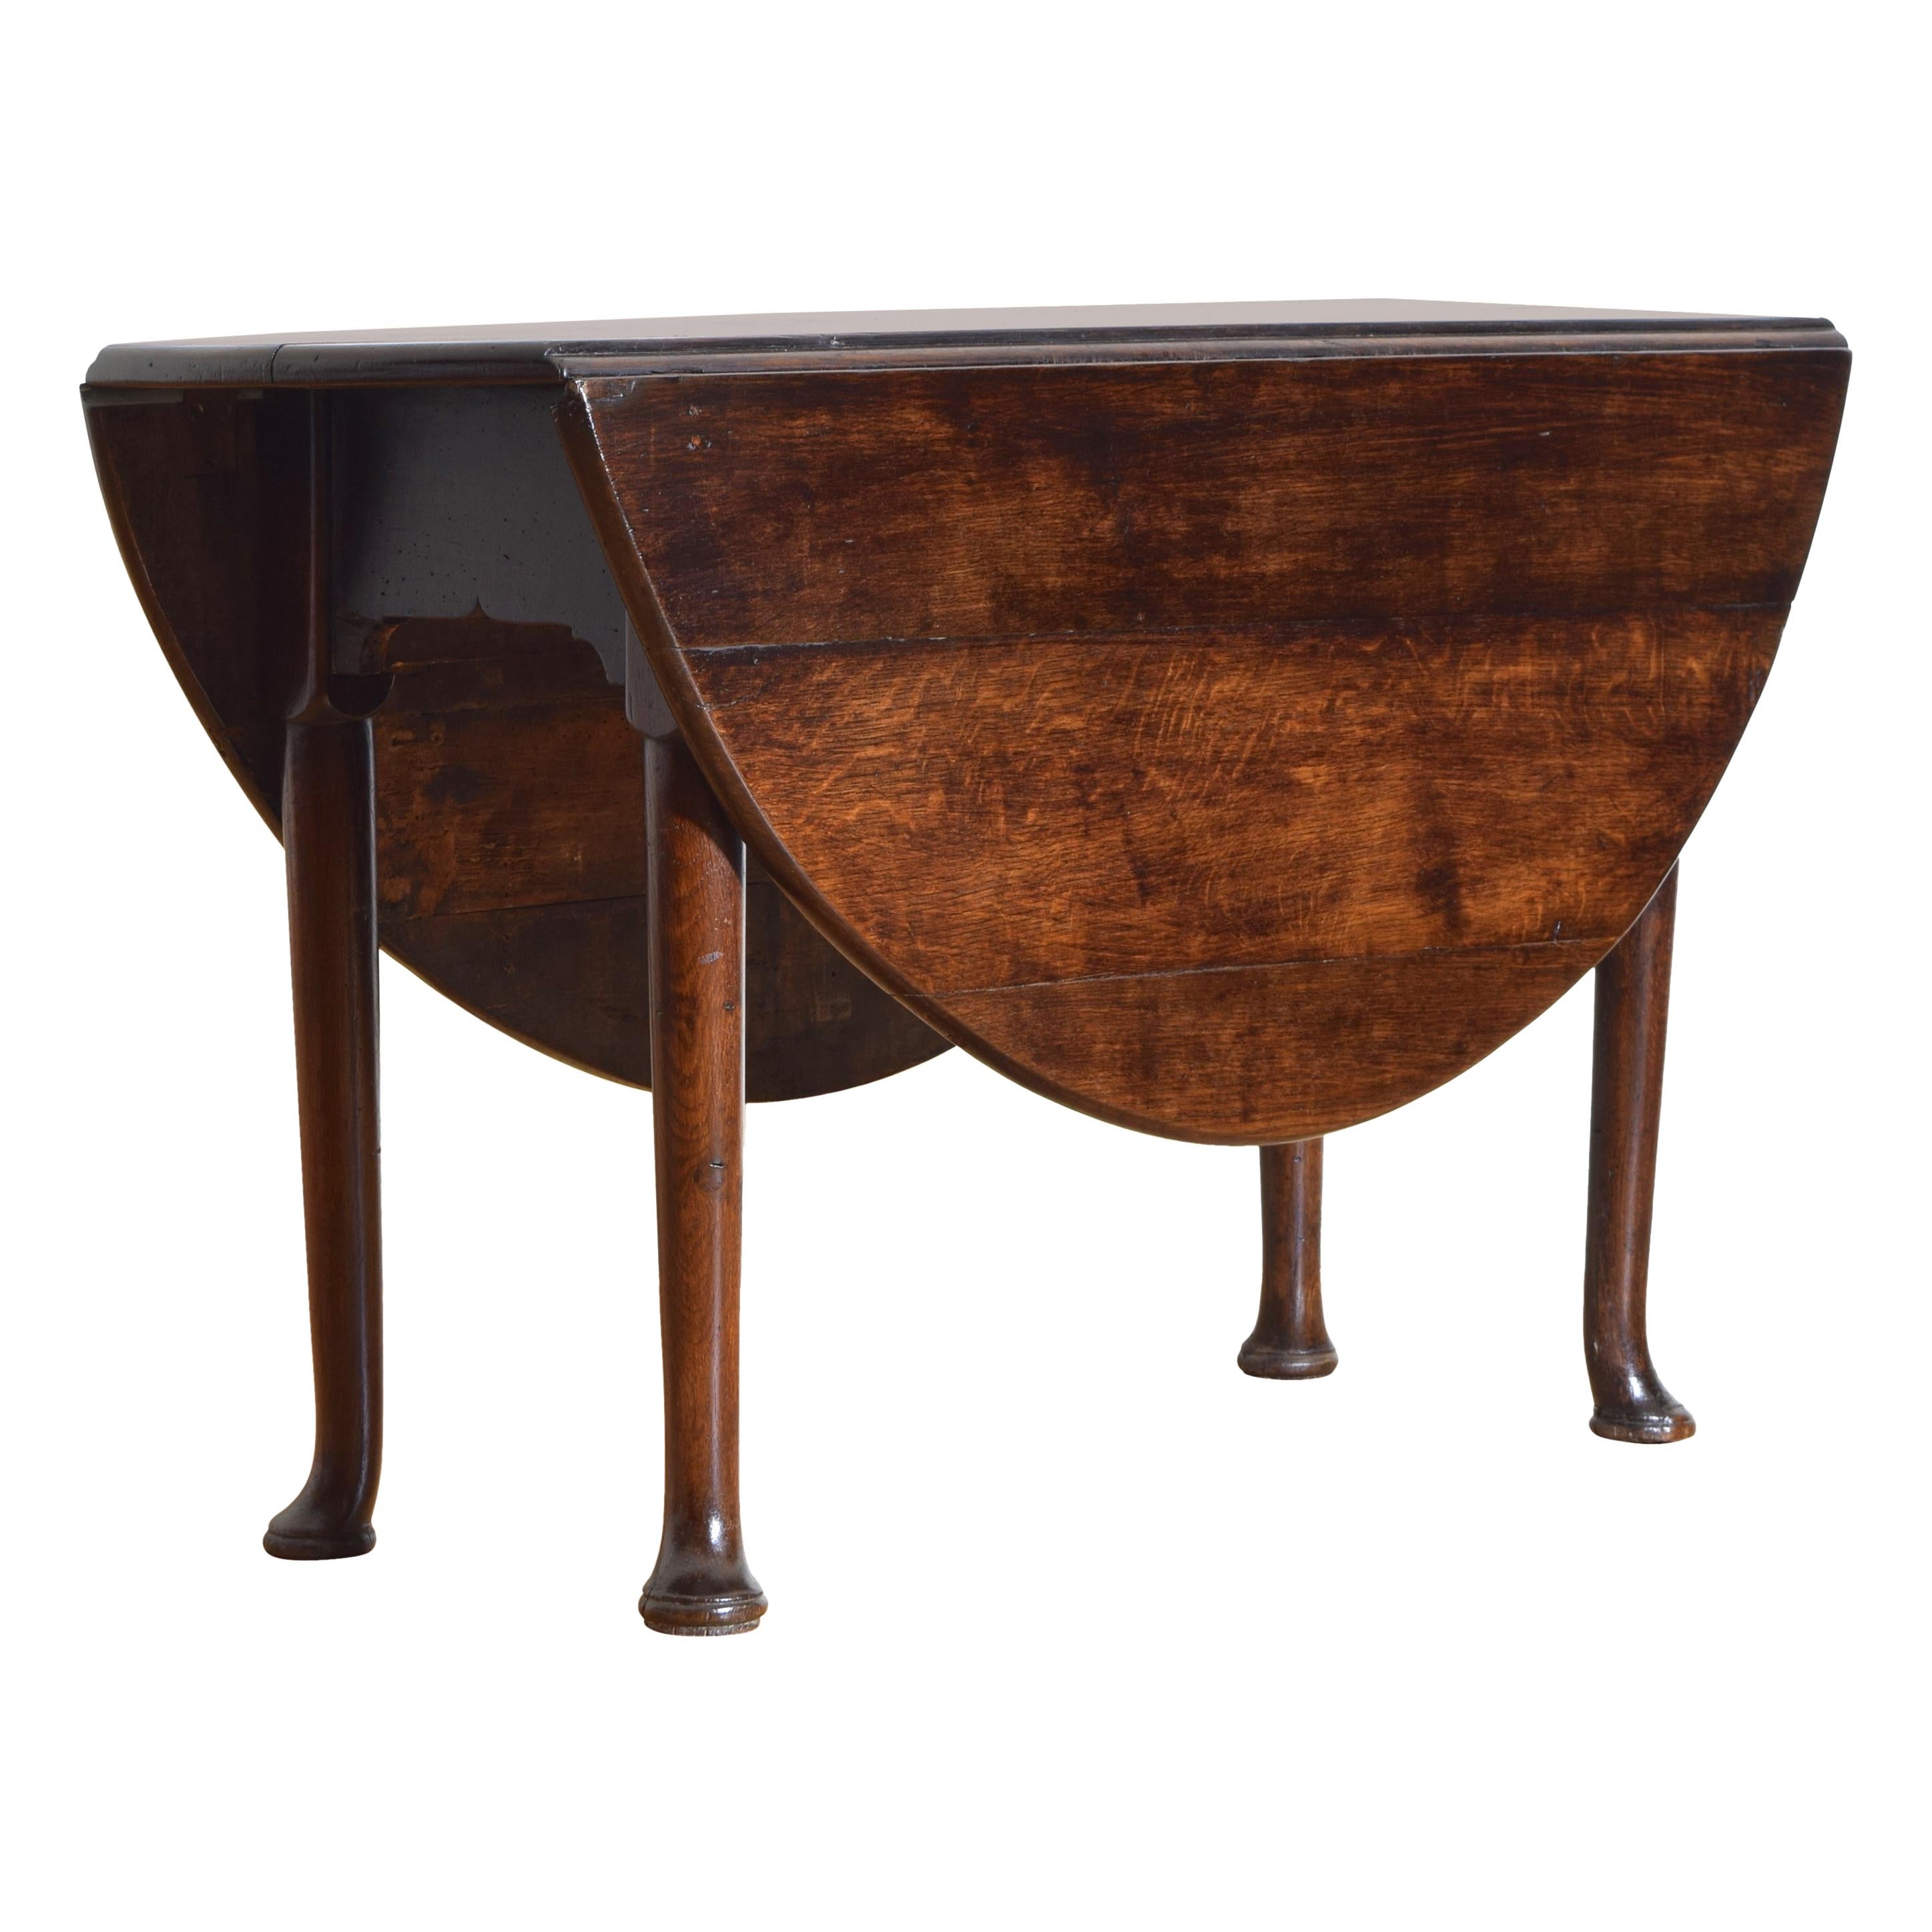 English Queen Anne Period Oak Drop-Leaf Table, First Quarter of the 18th Century